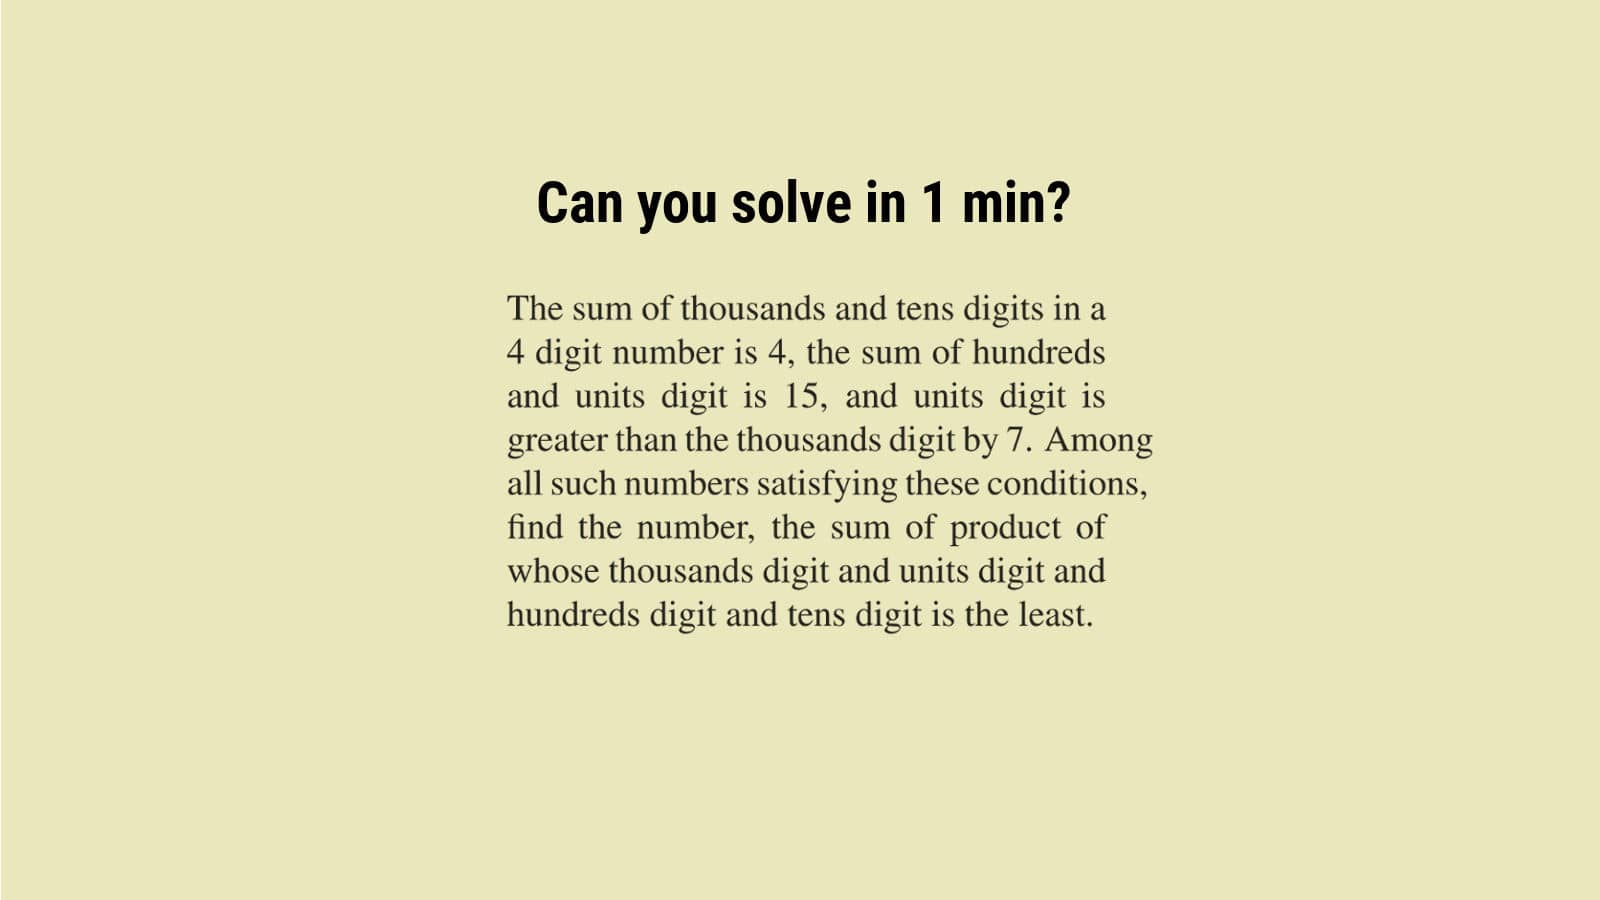 How to solve number system puzzle problem 4 in 1 min